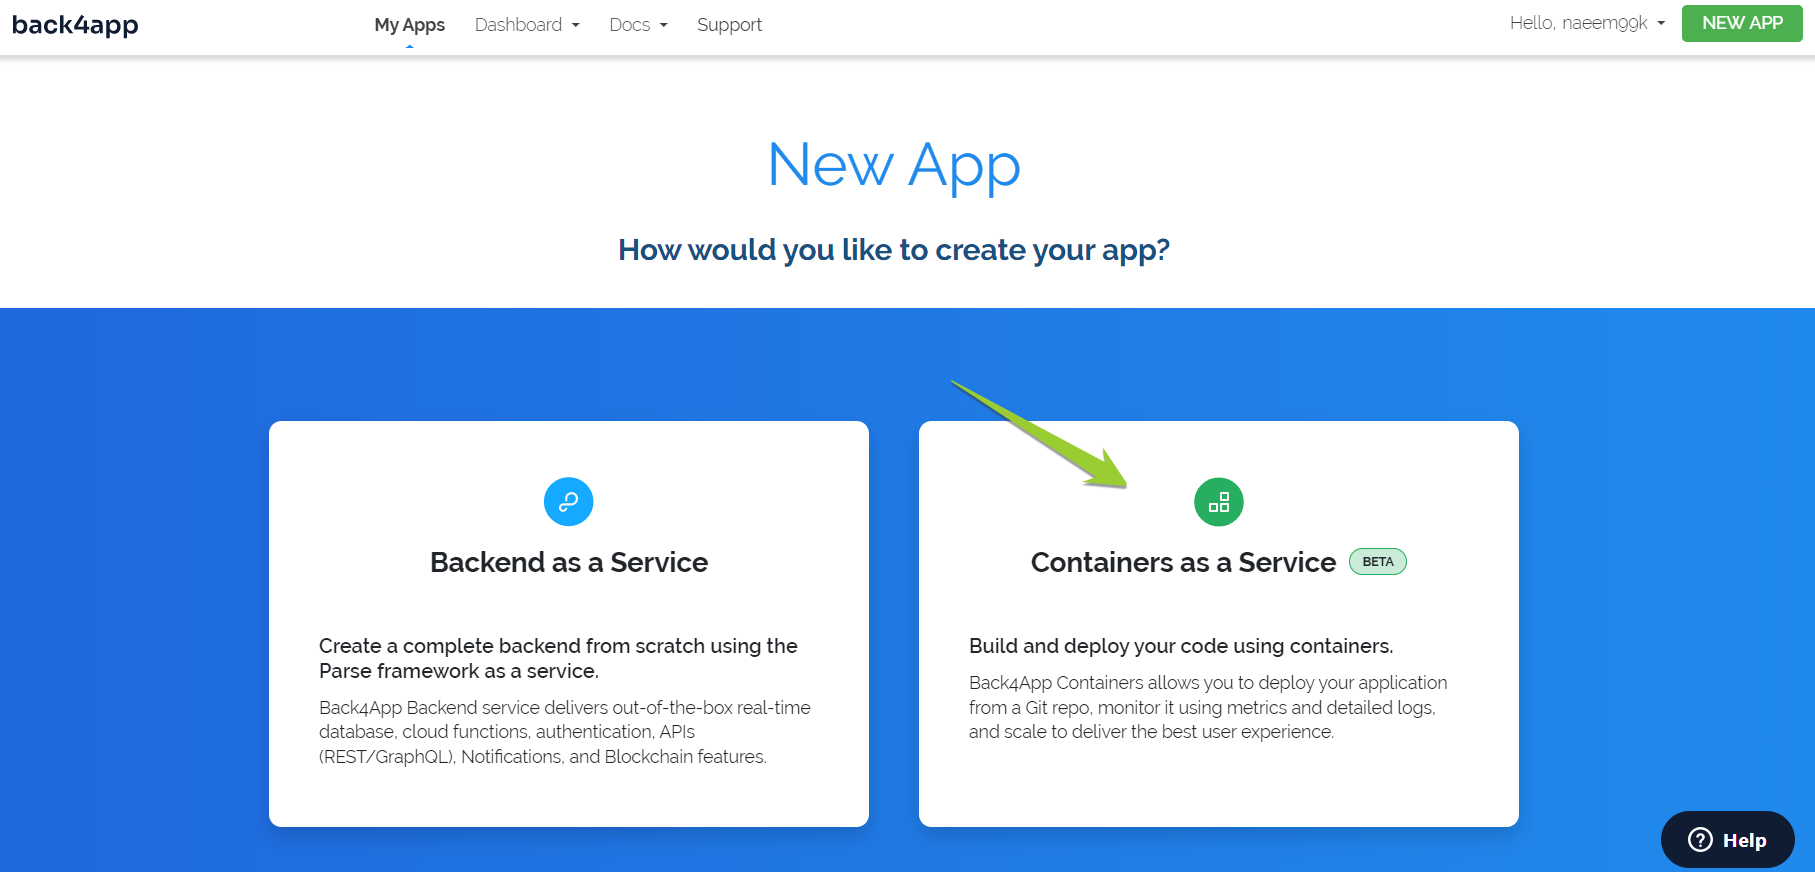 New App screen with options for Backend as a Service and Containers as a Service 